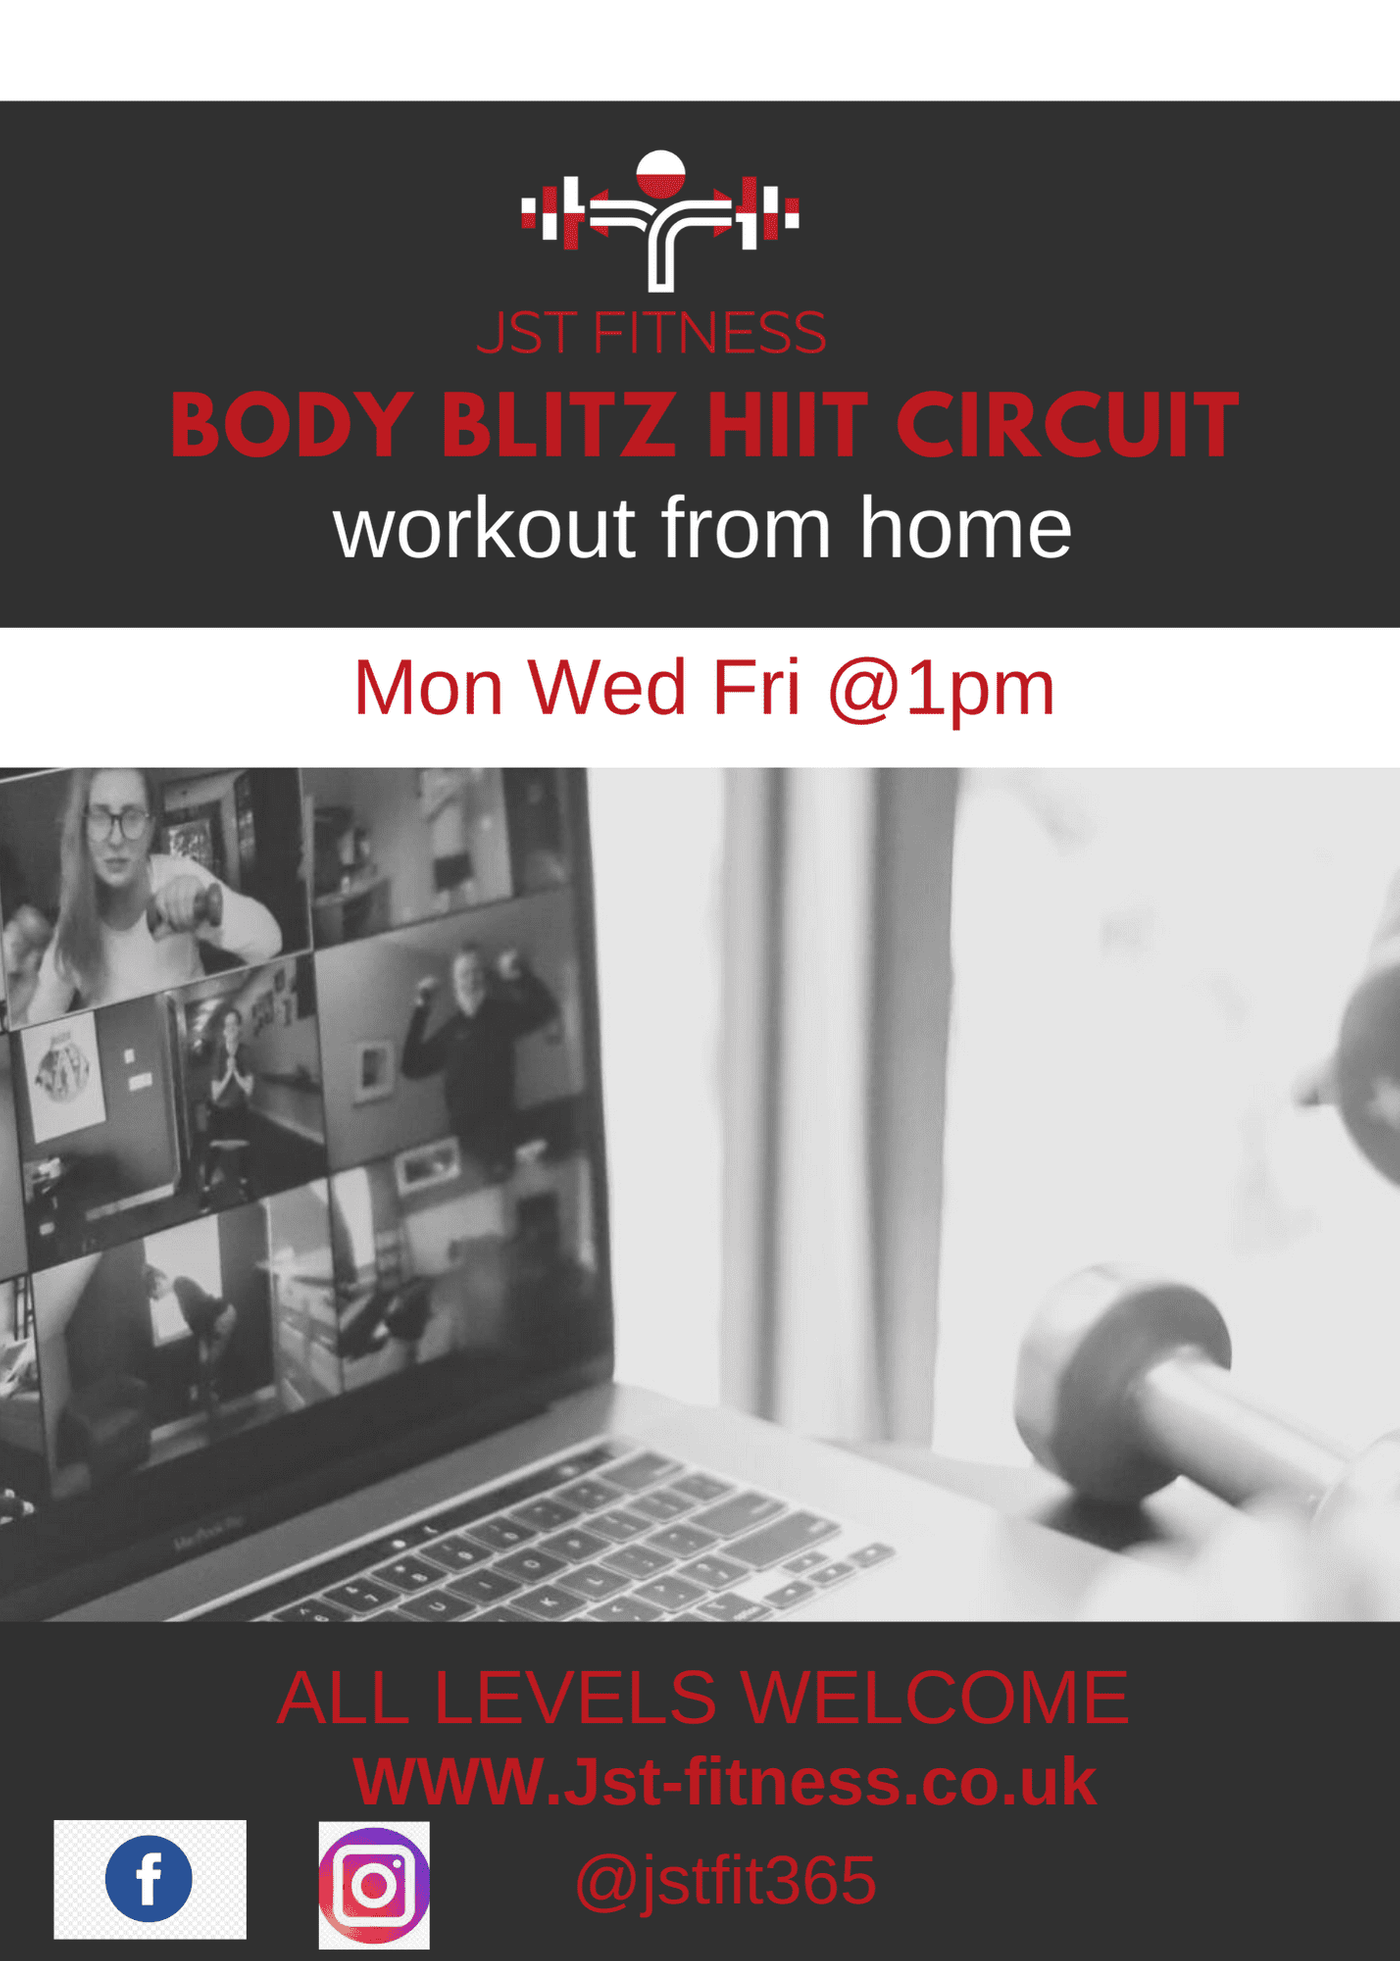 Starting on 6th June this is an  Online energetic fun whole body workout. It consists on resistance  and body weight  exercise with high intensity exercises in-between, designed to make you sweat.
All levels catered for.
So book in and let's Get done.